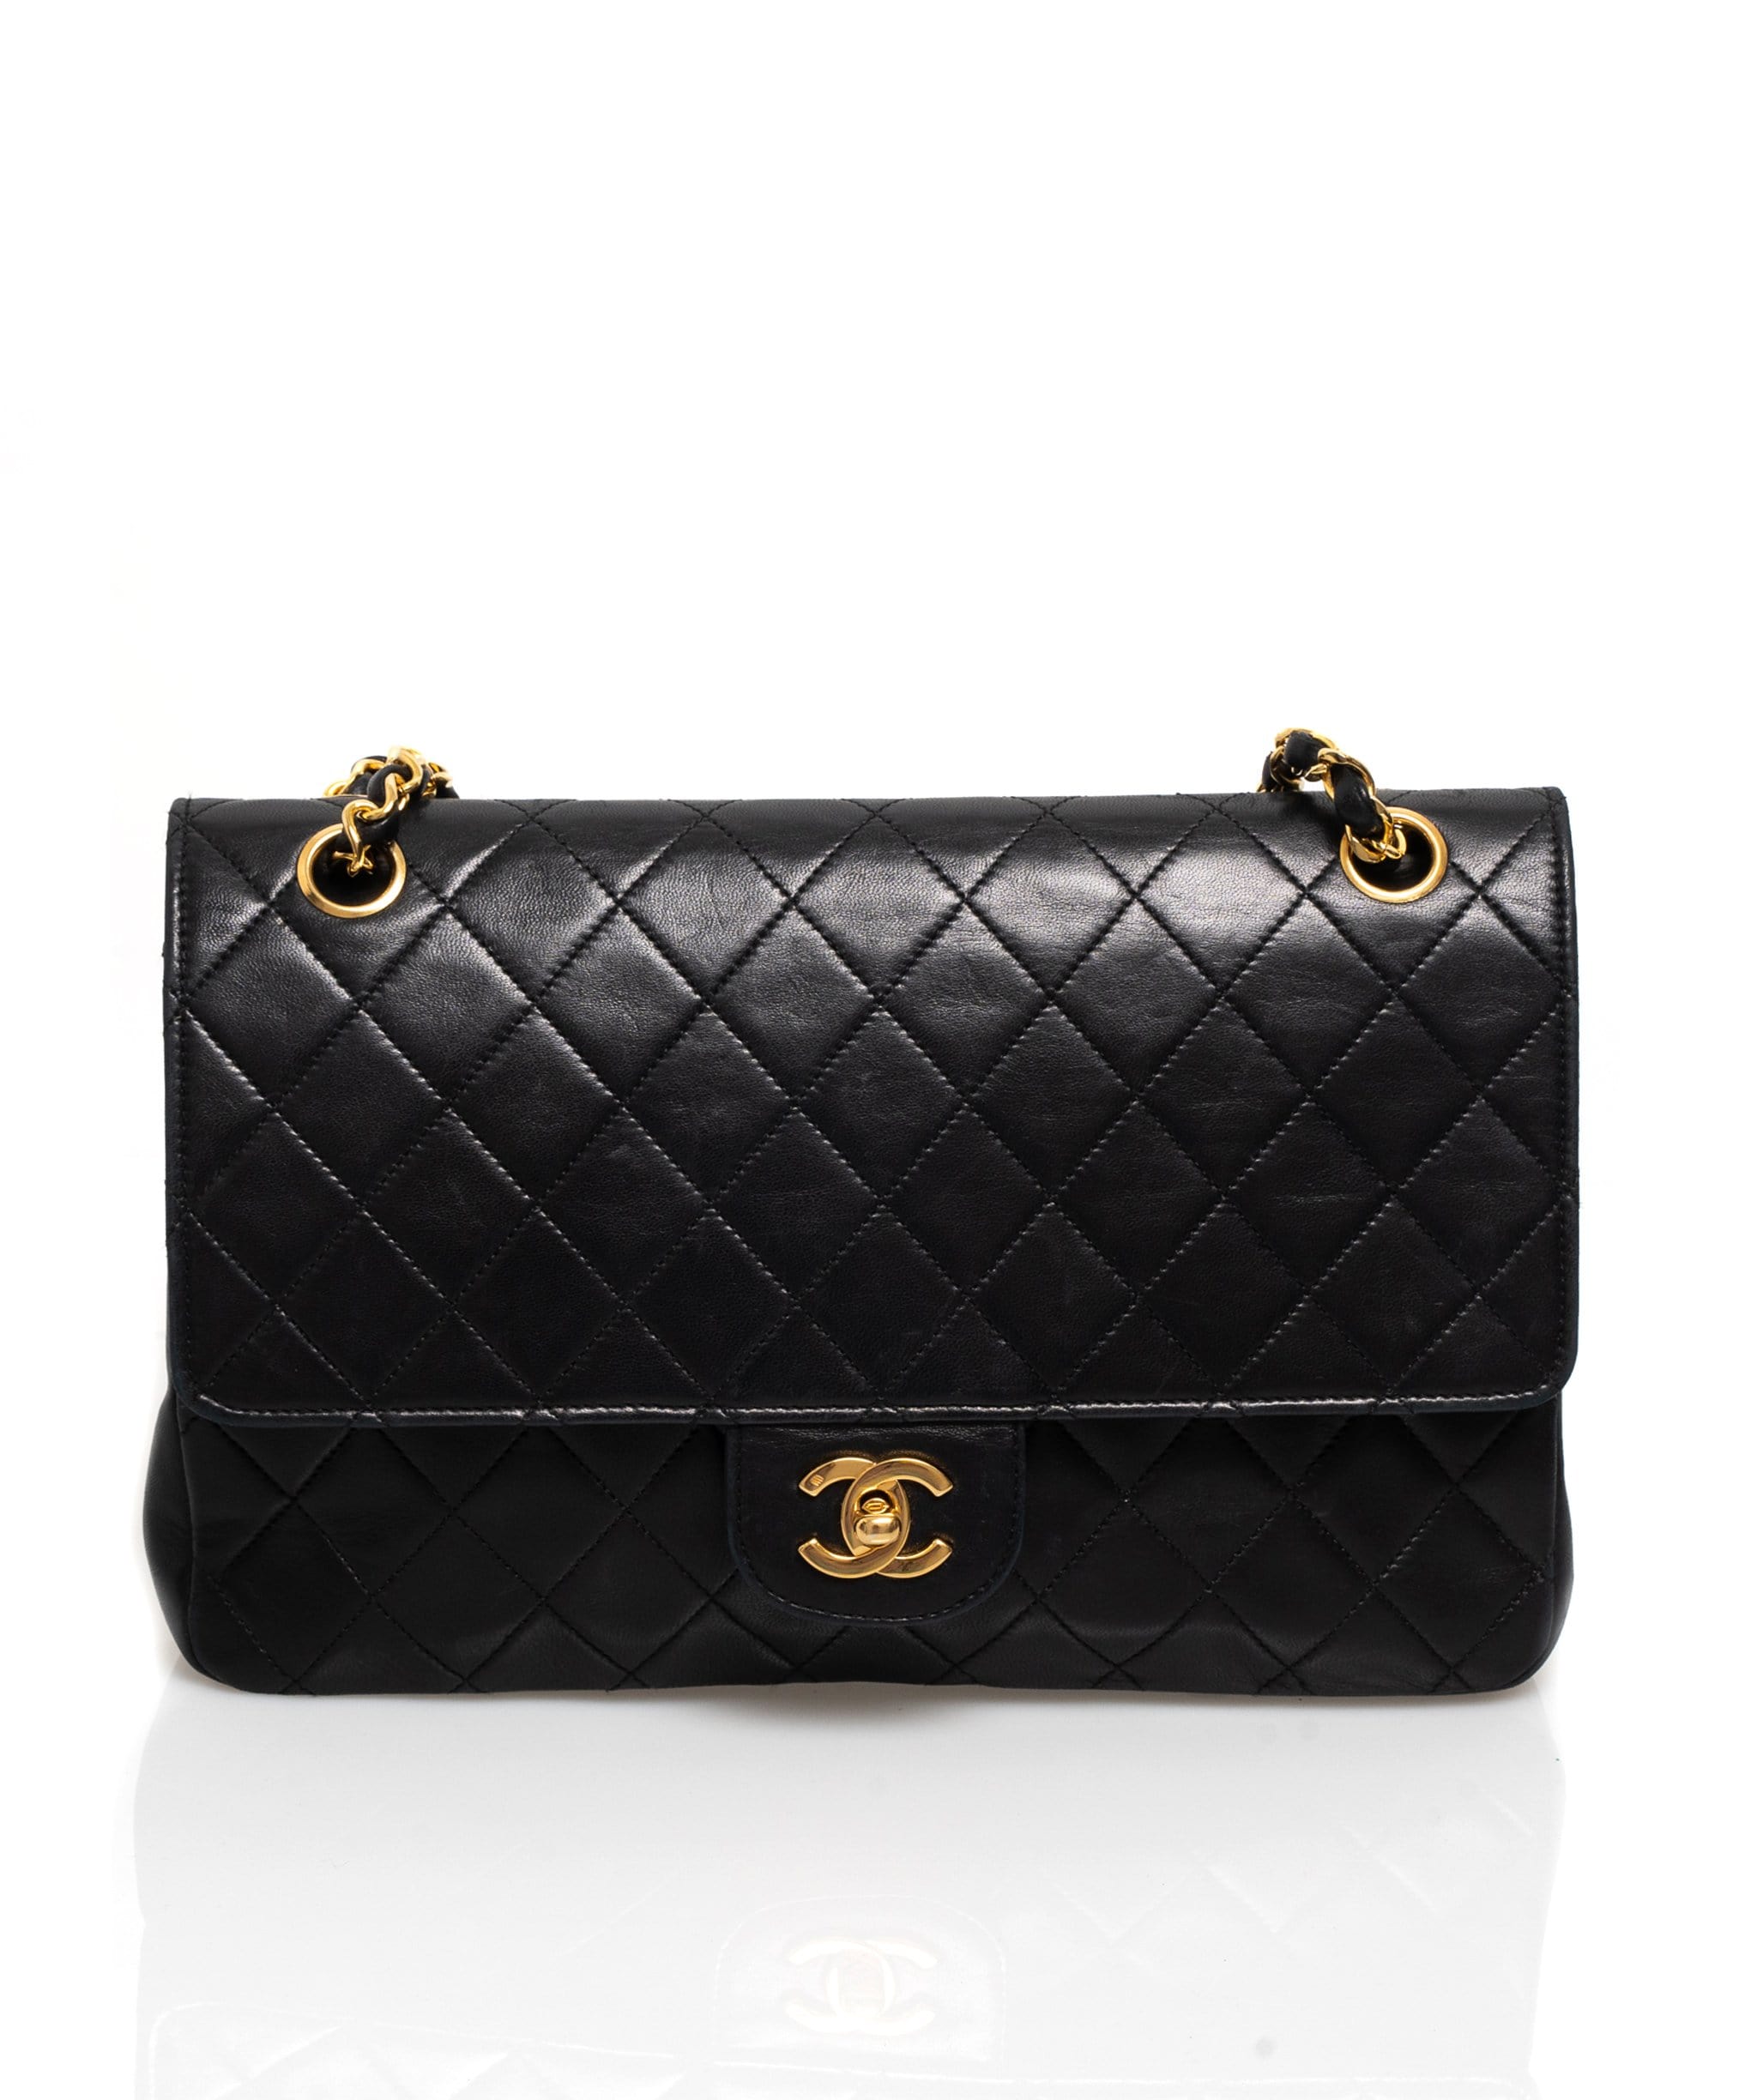 Chanel Classic 'Sellier' Style Double Flap Bag MW2443